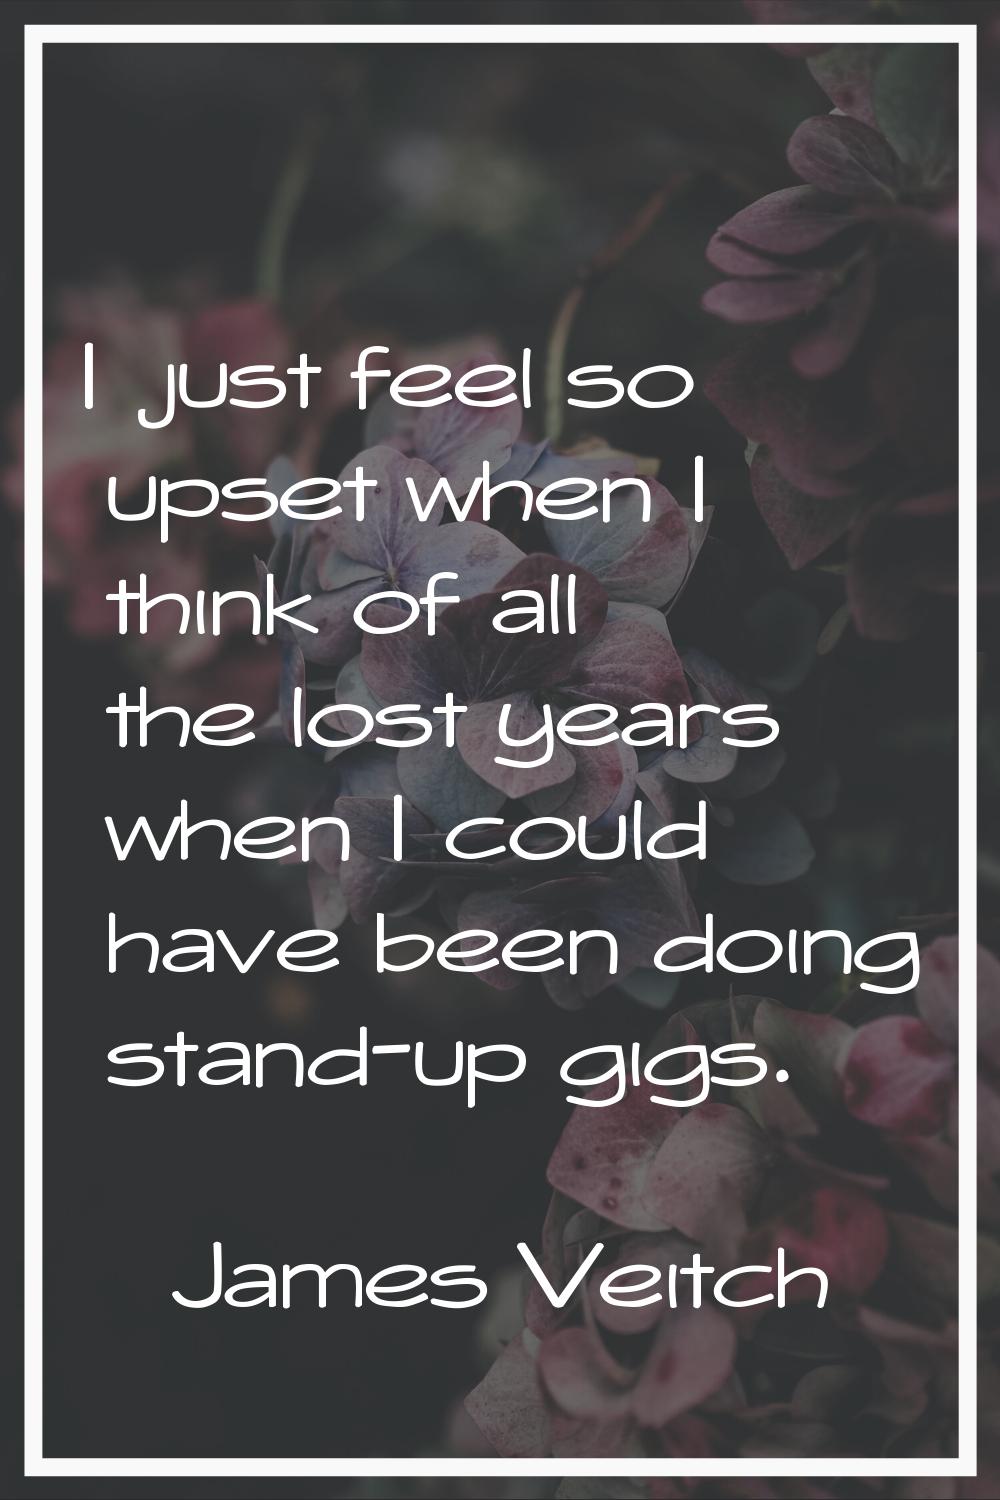 I just feel so upset when I think of all the lost years when I could have been doing stand-up gigs.